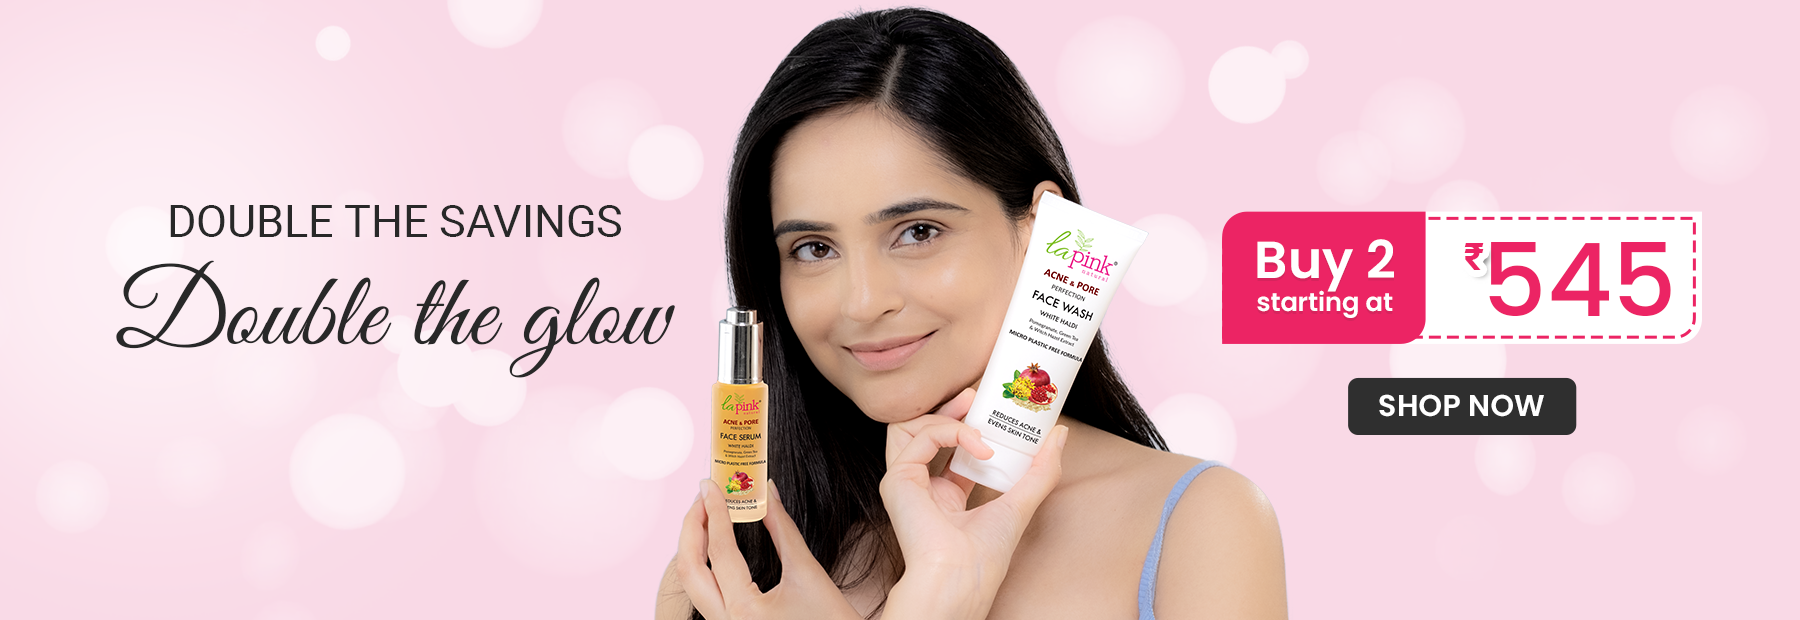 Buy 2 and Get Exciting offers on La Pink 100% Microplastic Free Formulation Based products